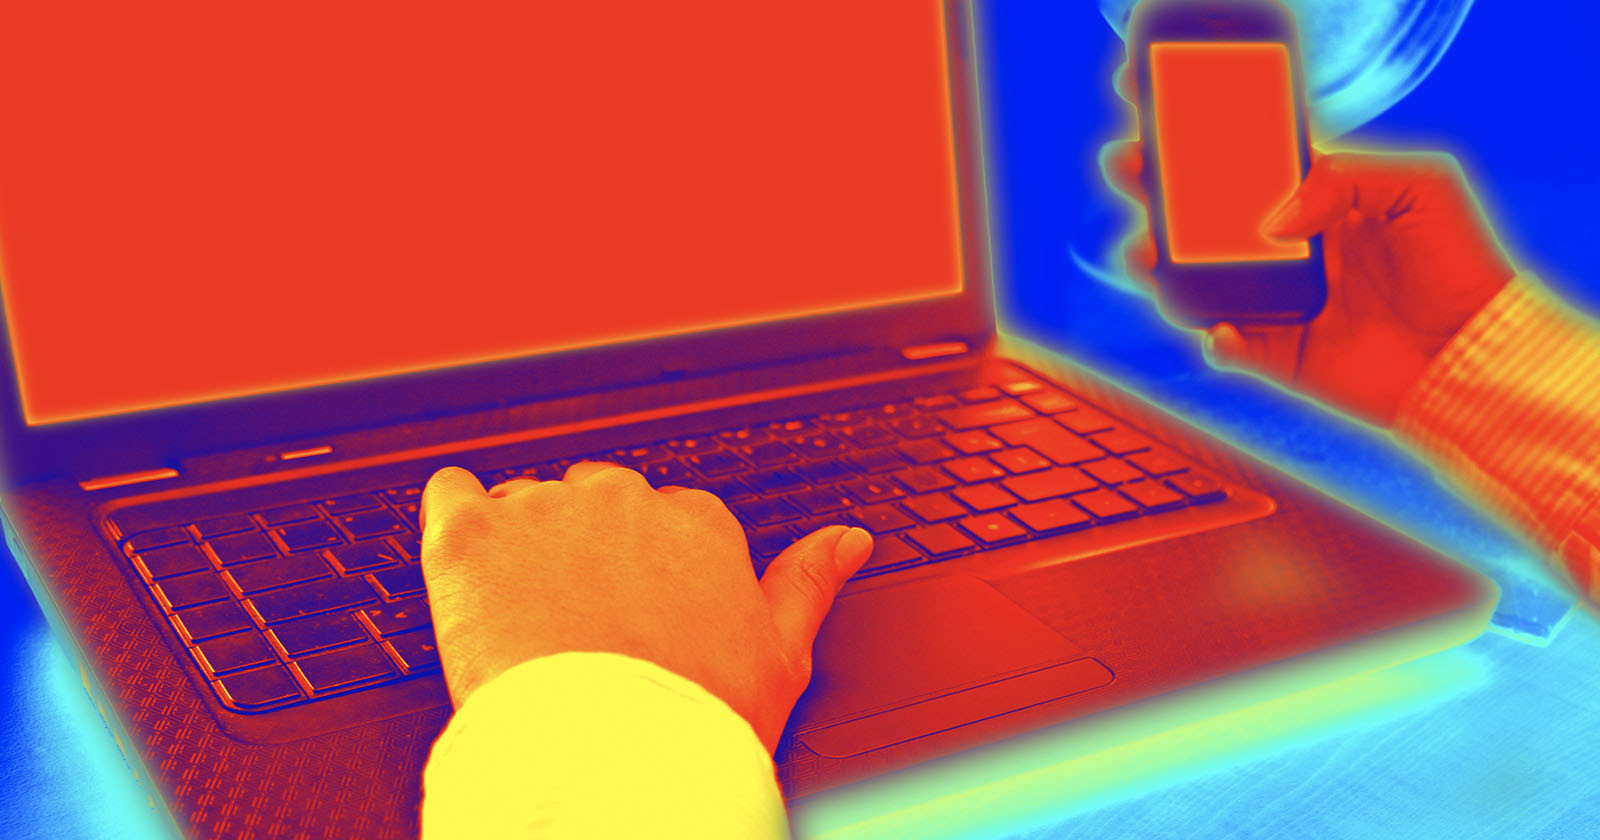 Thermal Cameras and AI Can Be Used to Crack Passwords, New Study Warns